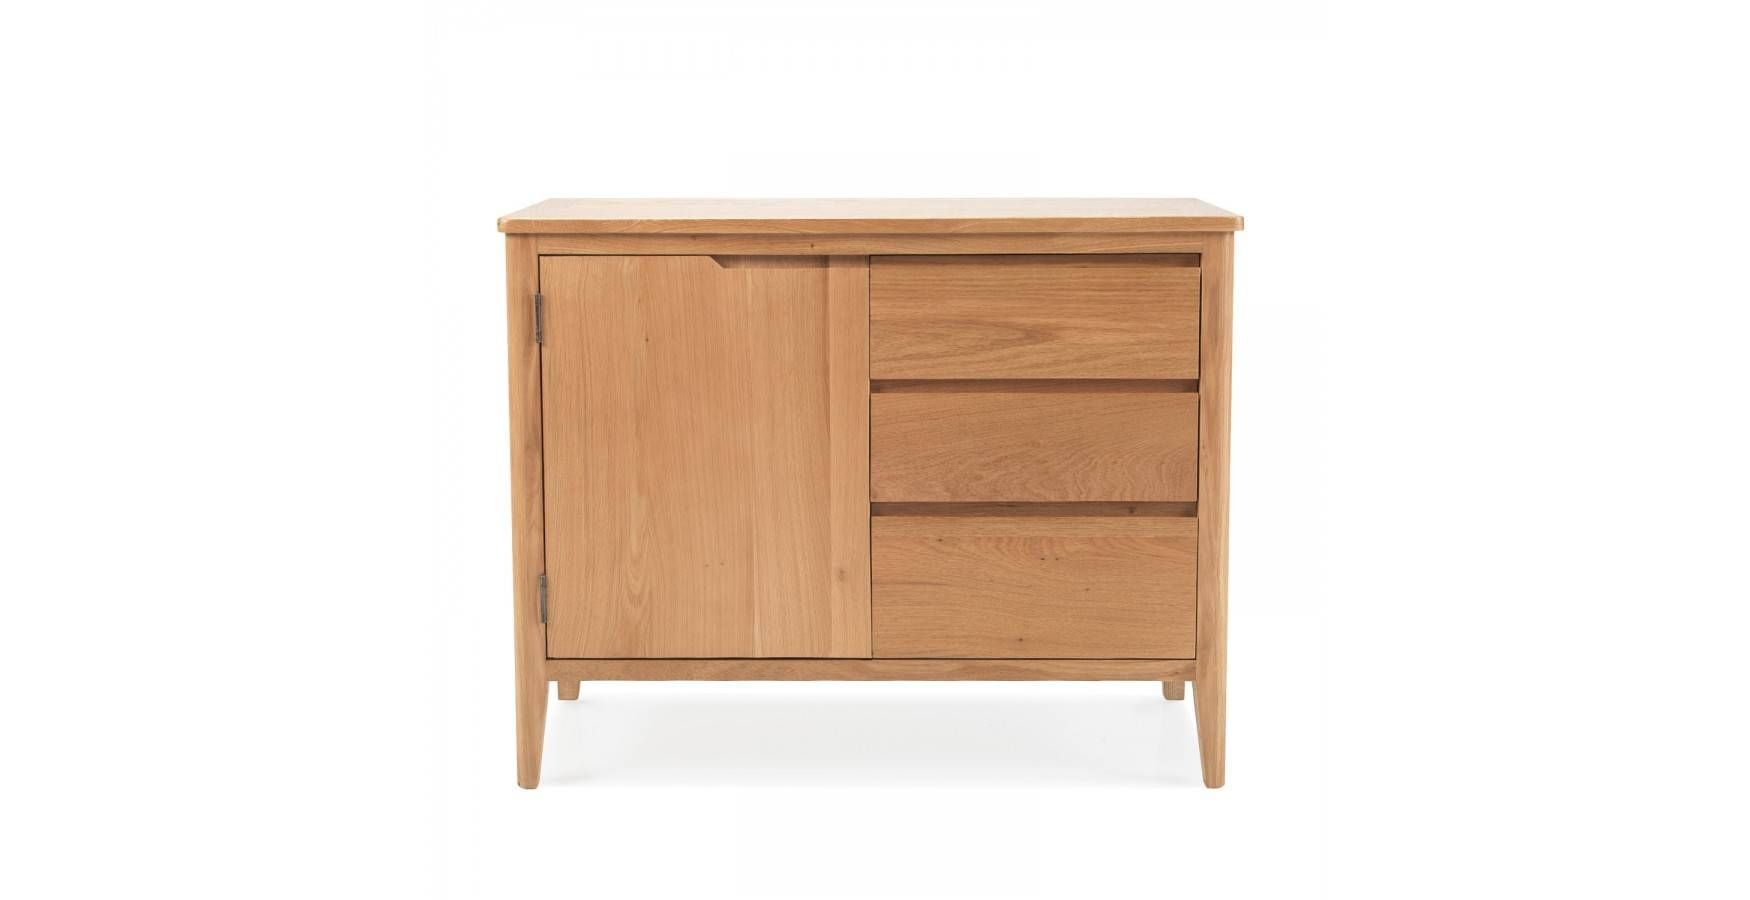 Cadley Oak Small Sideboard With Drawers – Lifestyle Furniture Uk In Small Sideboard With Drawers (View 7 of 20)